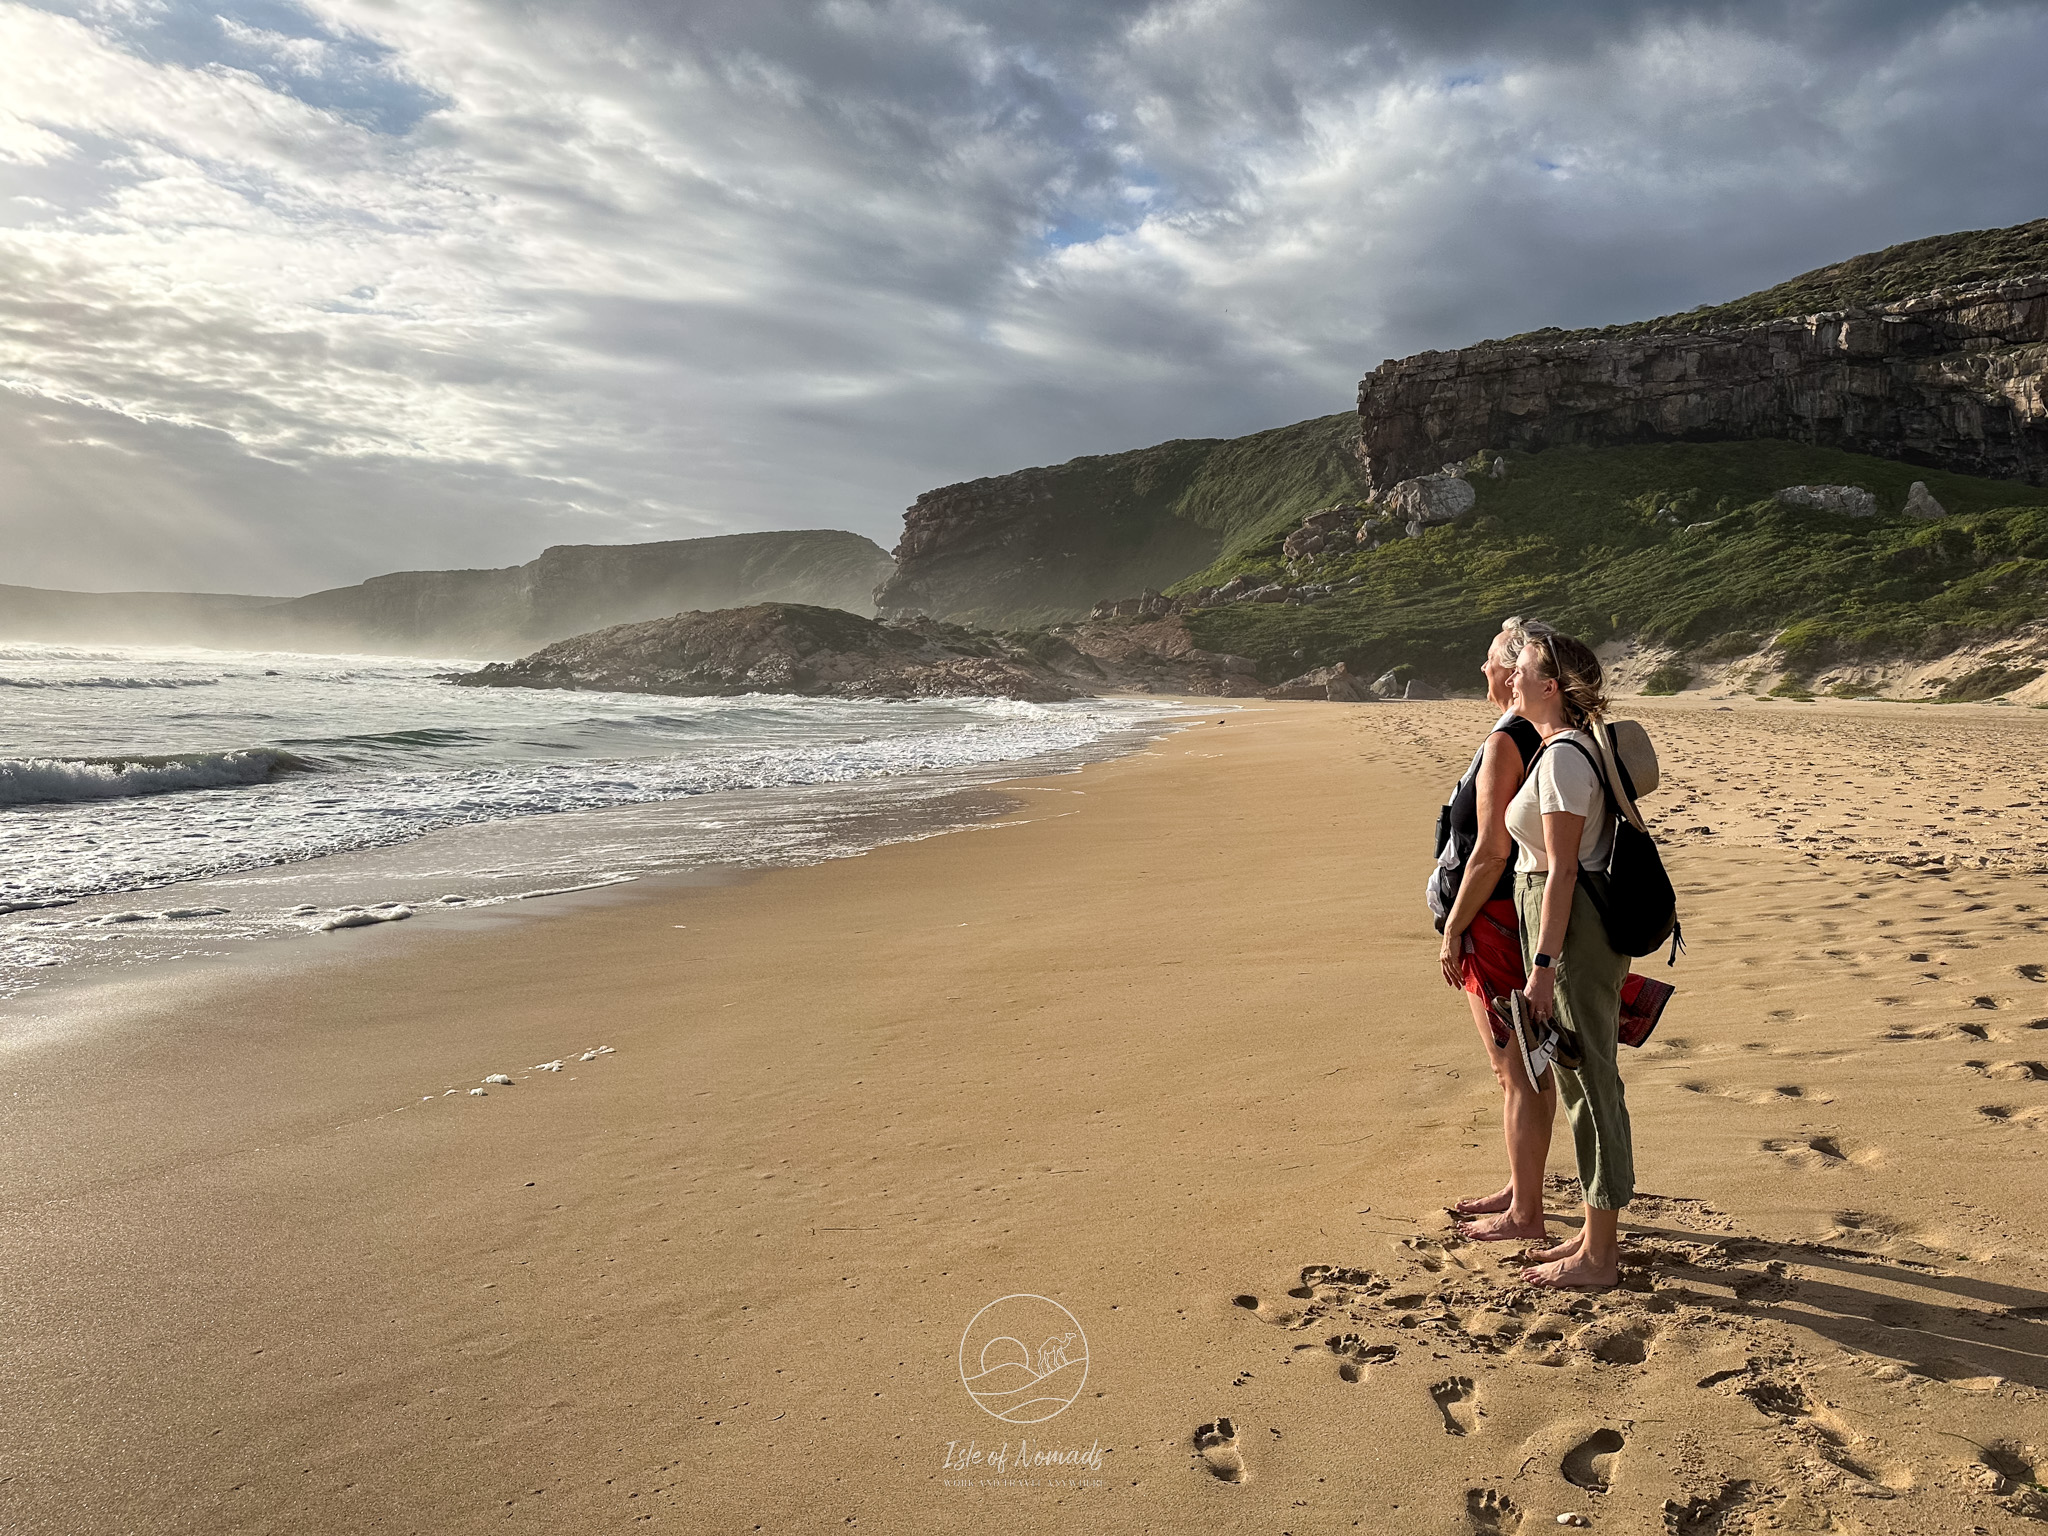 Robberg Nature Reserve has some of the most beautiful beaches in South Africa